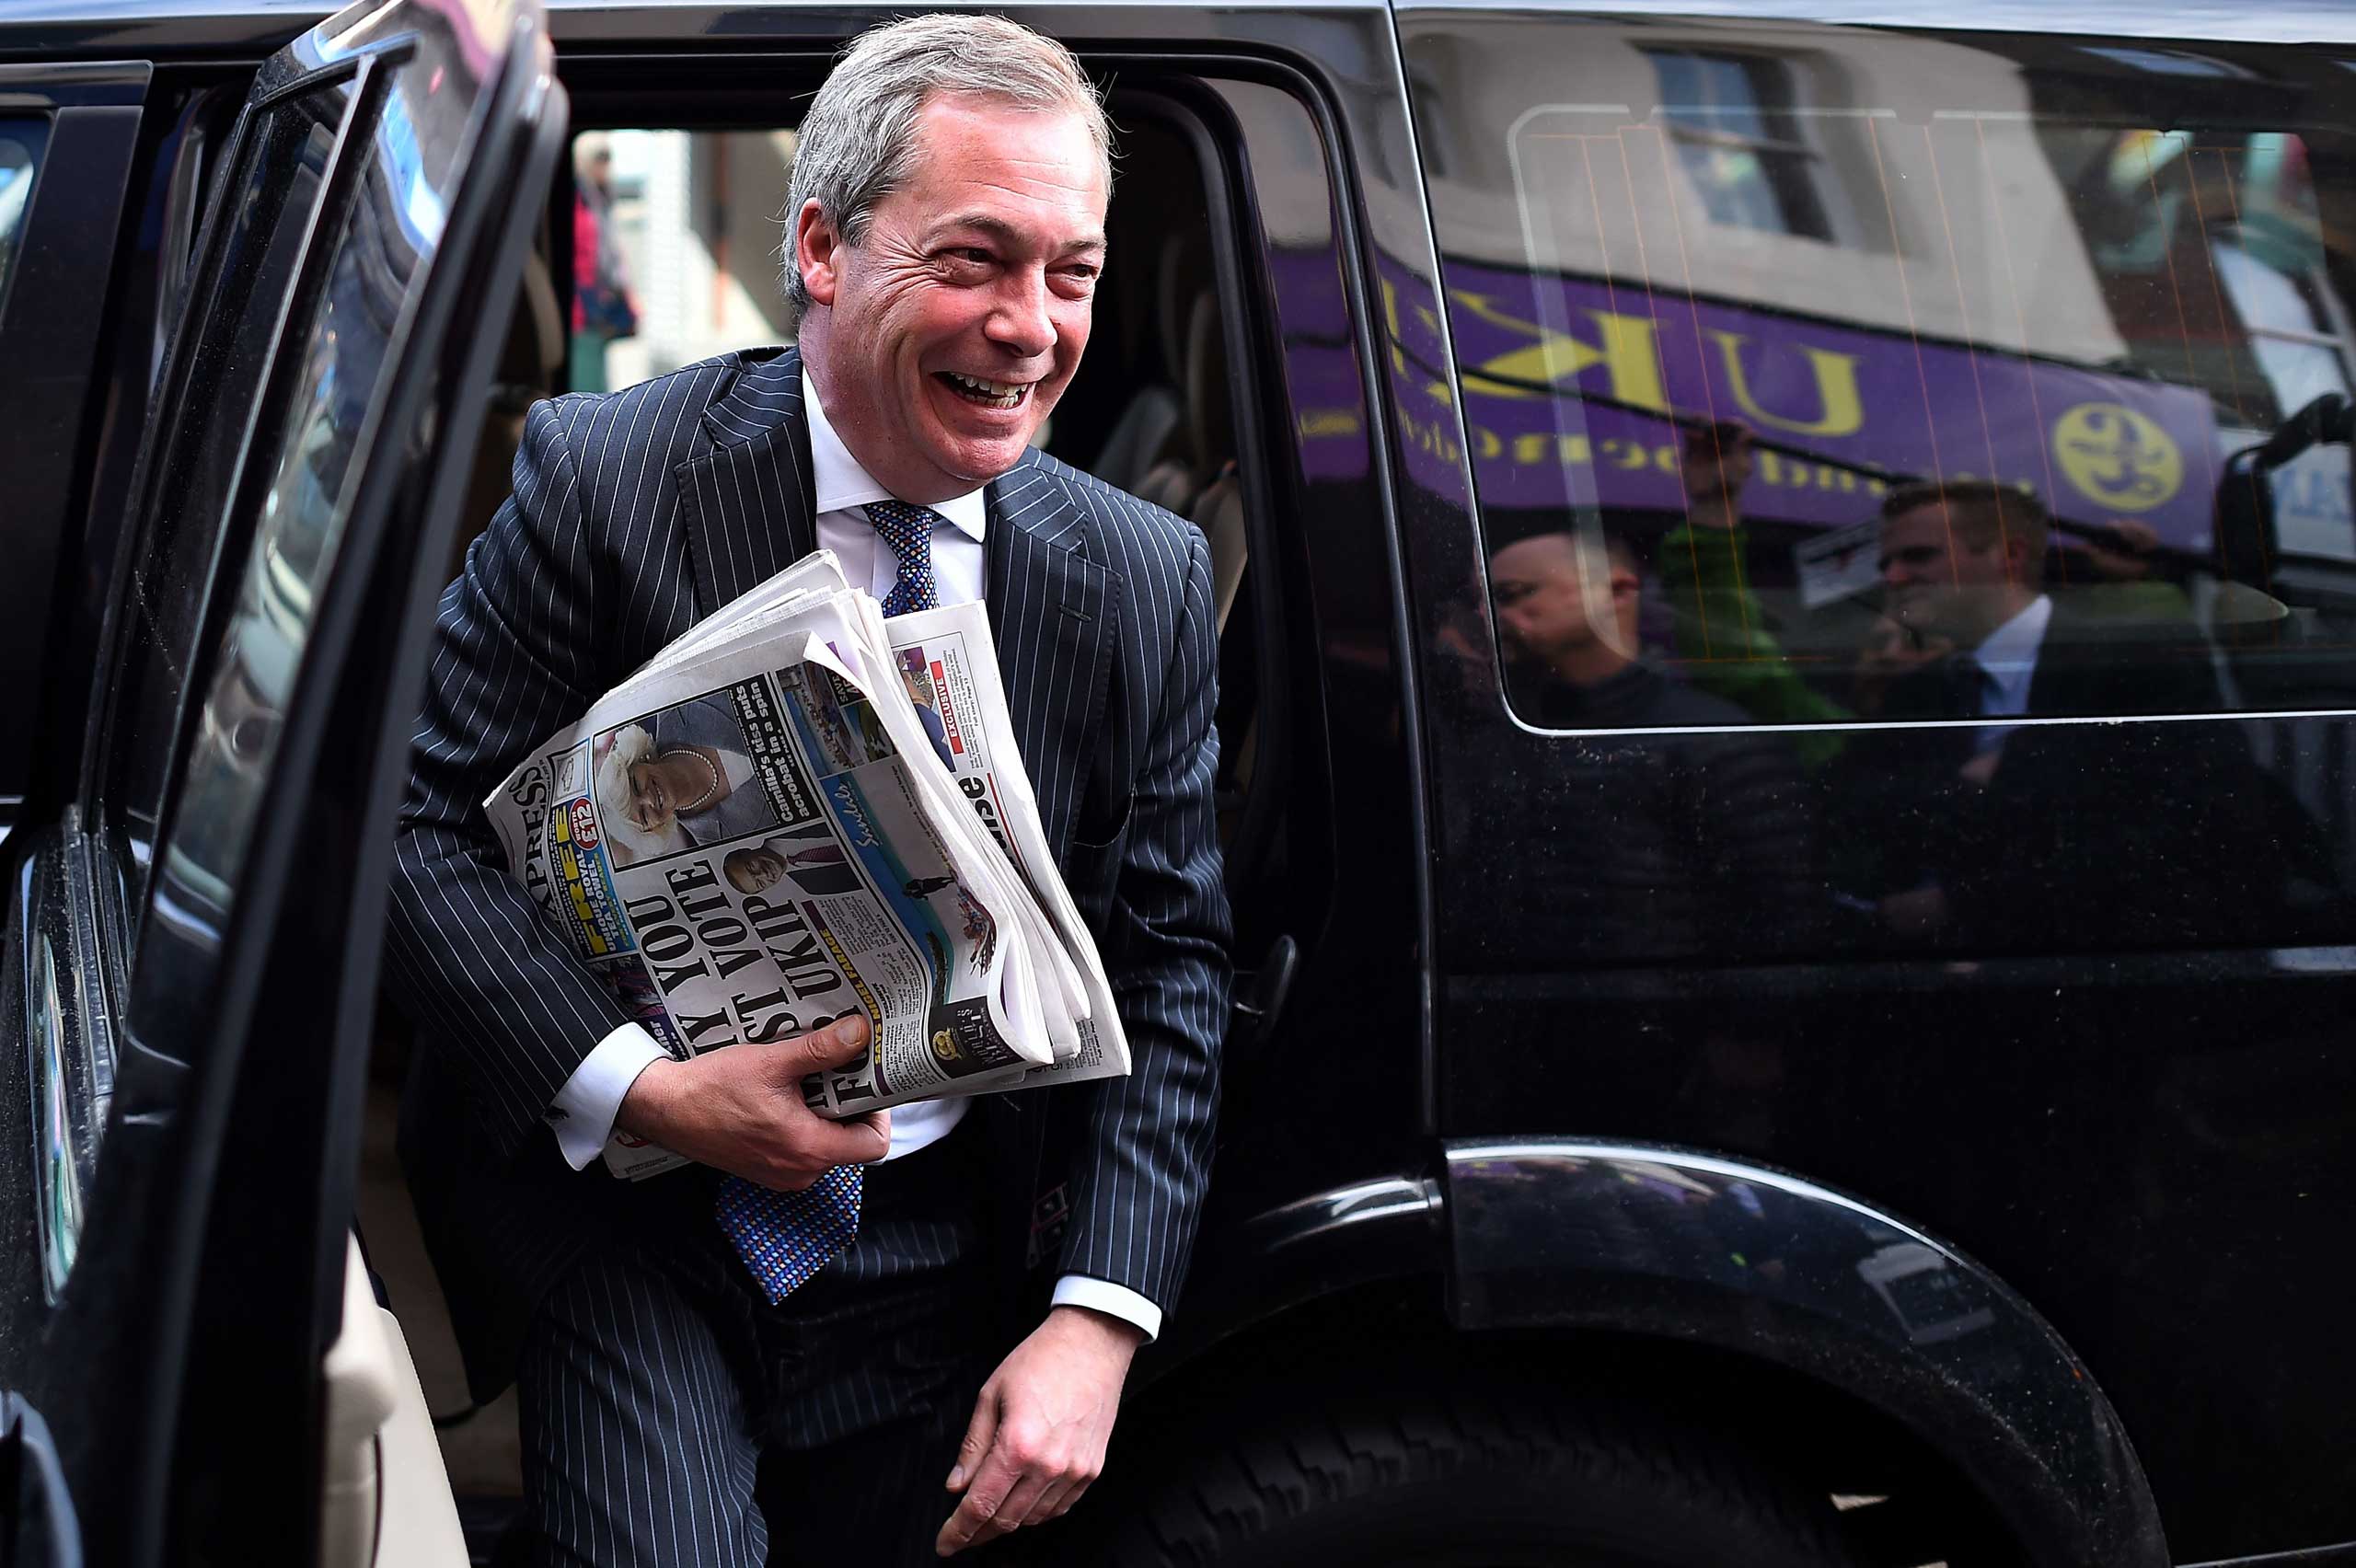 UK Independence Party leader Nigel Farage arrives for a campaign visit in Ramsgate in south east England on May 6, 2015, on the eve of a general election in Britain. (Ben Stansall—AFP/Getty Images)